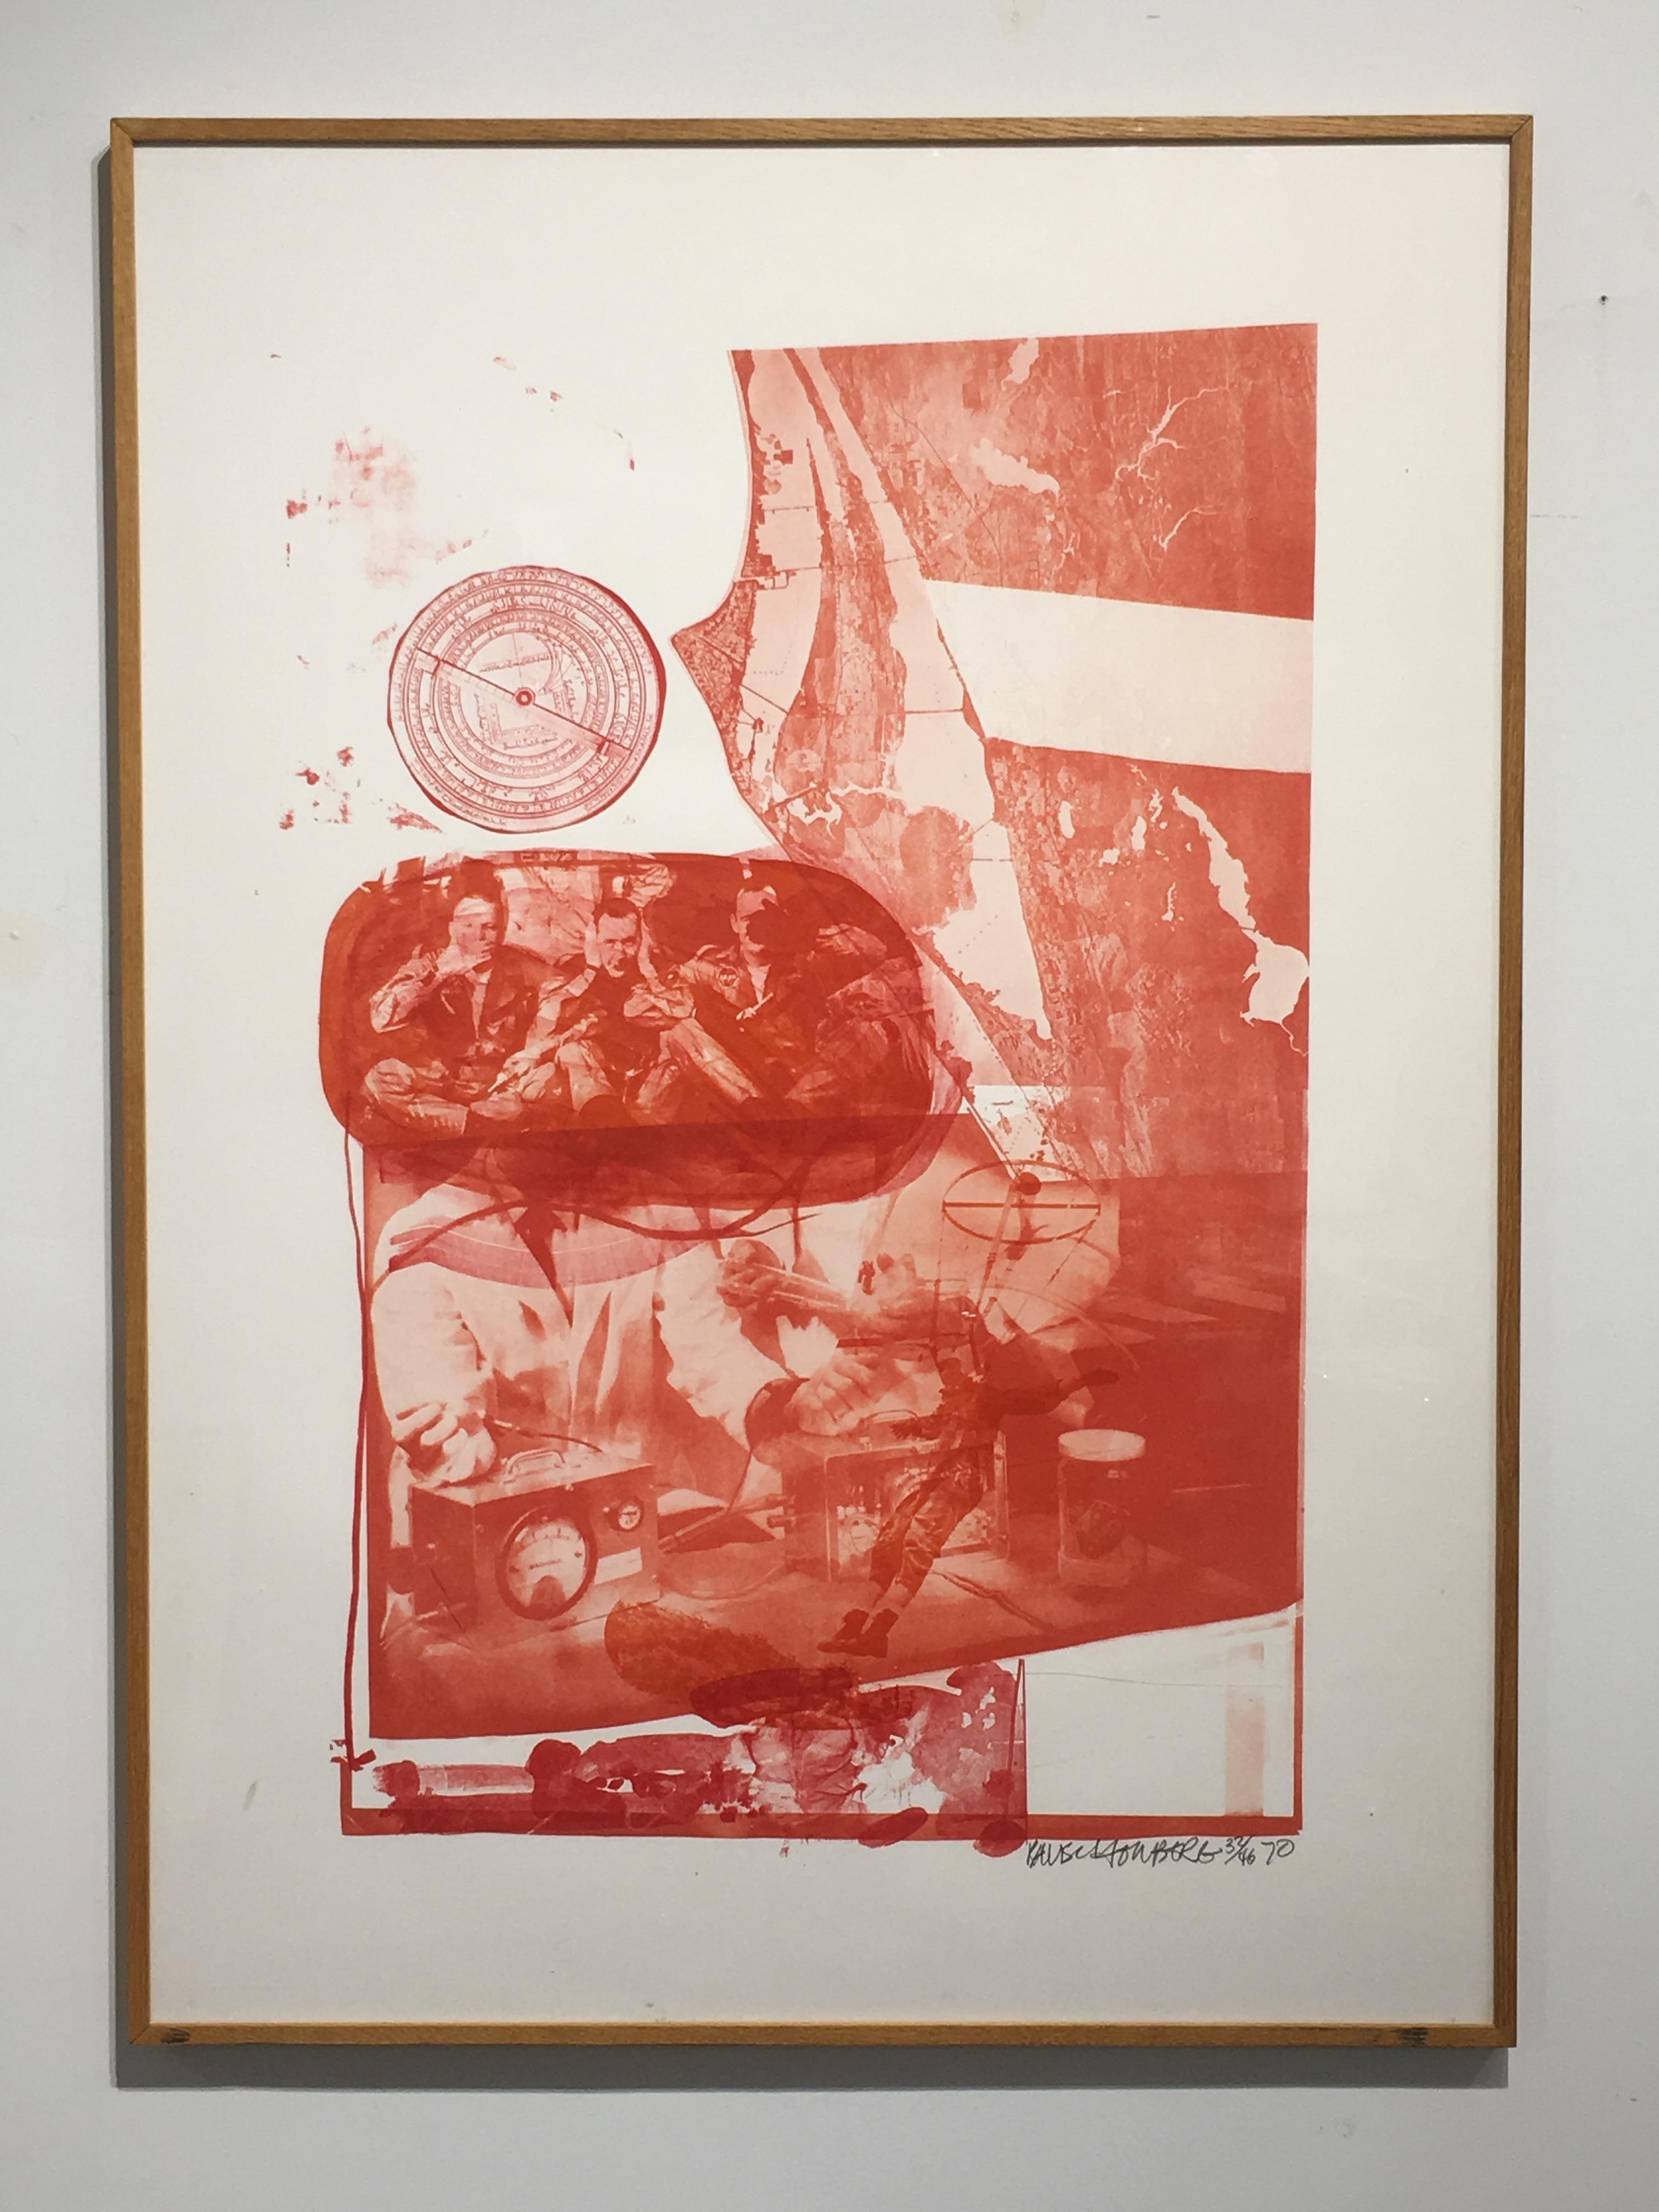 Ape, from Stoned Mood - Print by Robert Rauschenberg